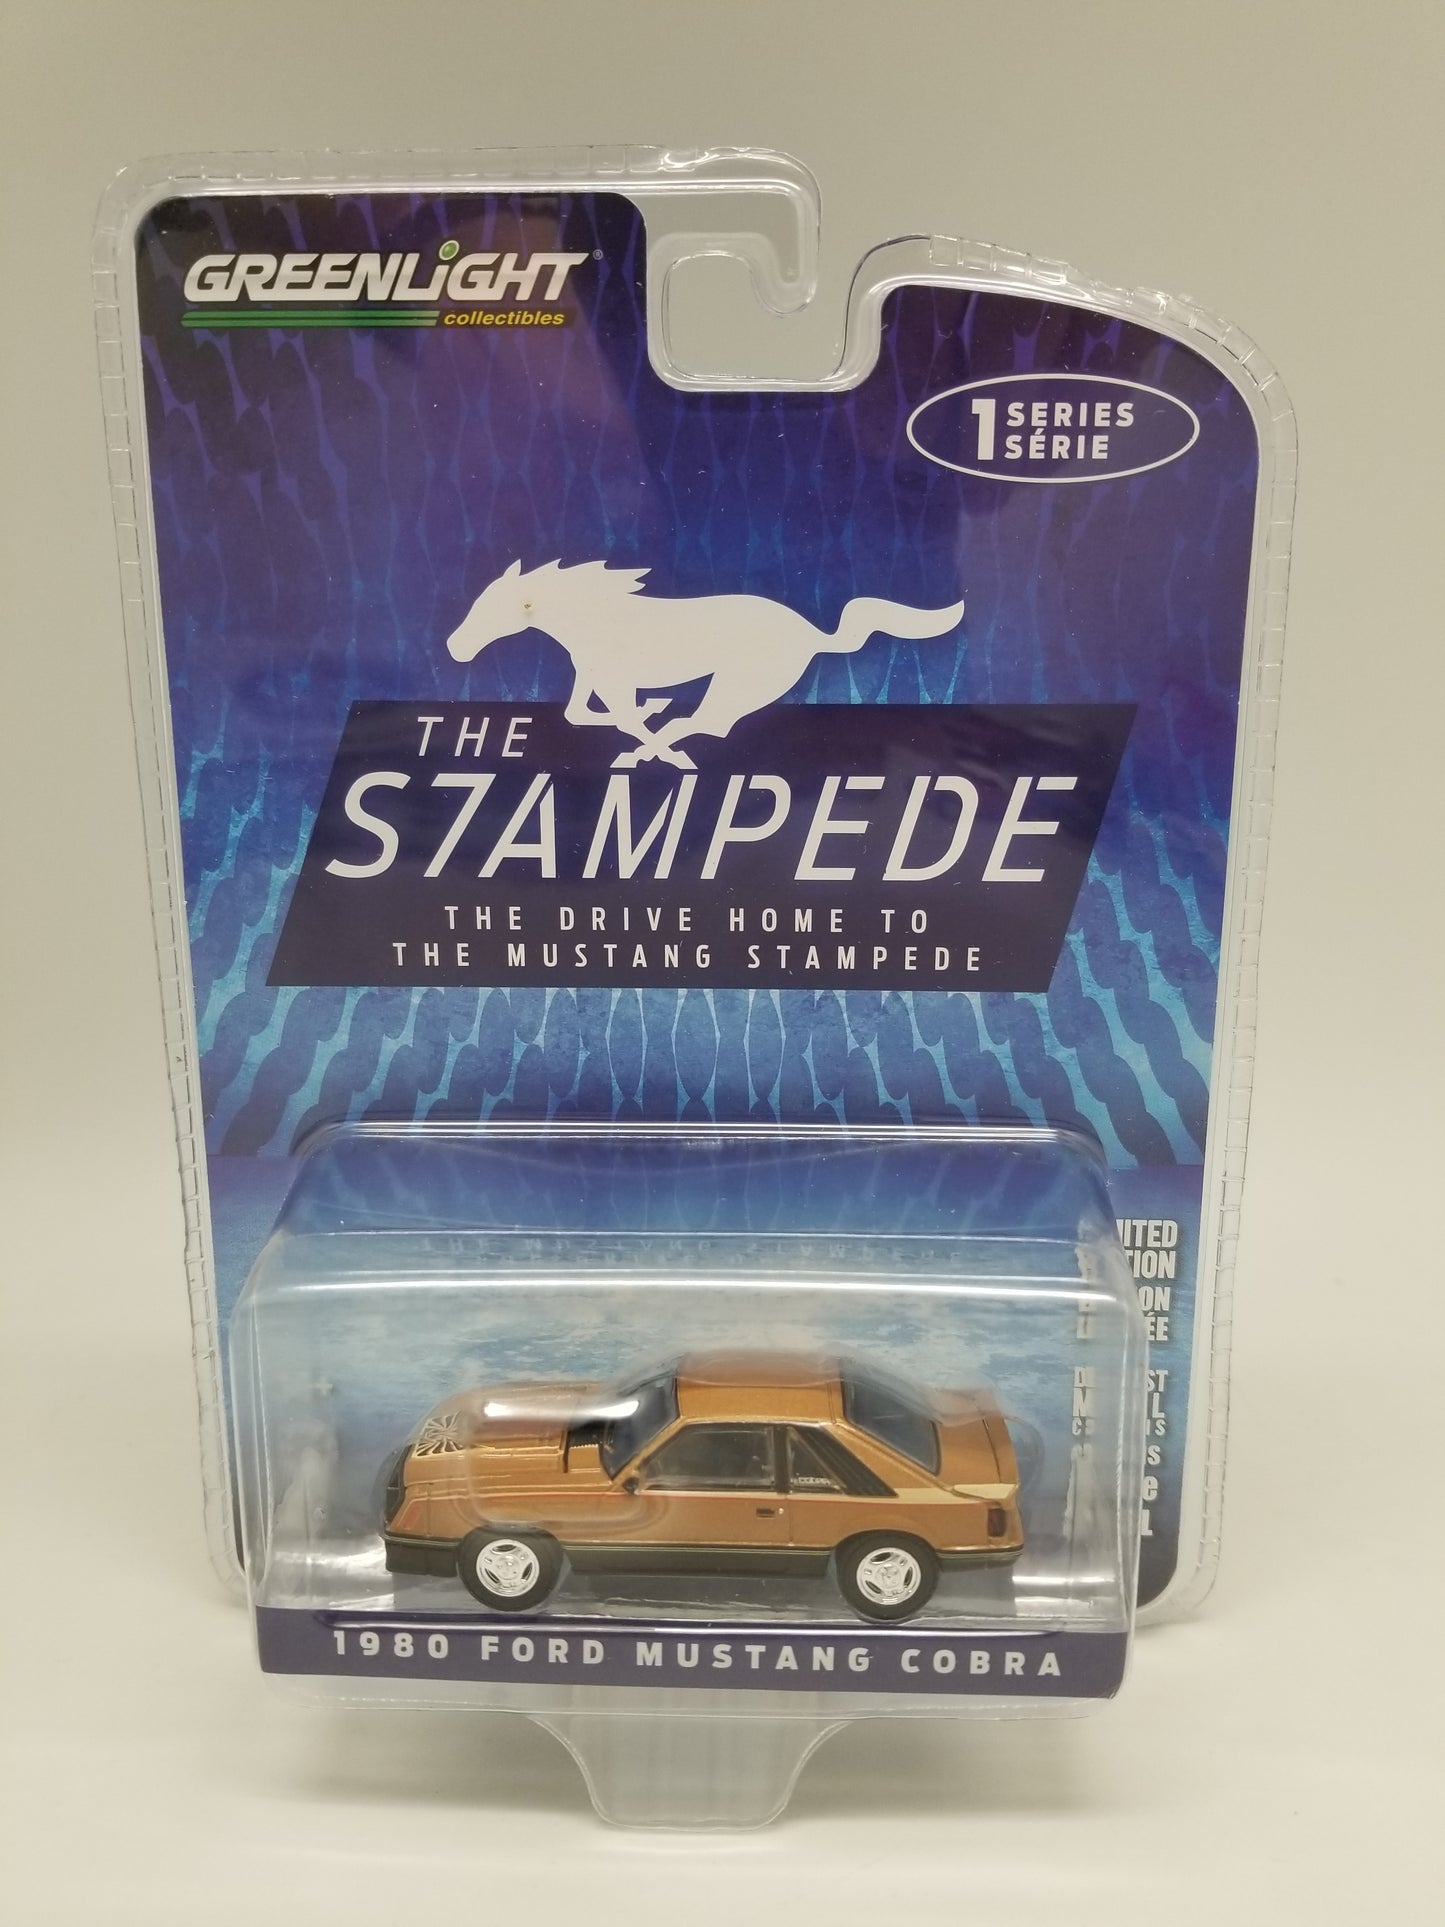 GL - 1980 Ford Mustang COBRA - The Stampede